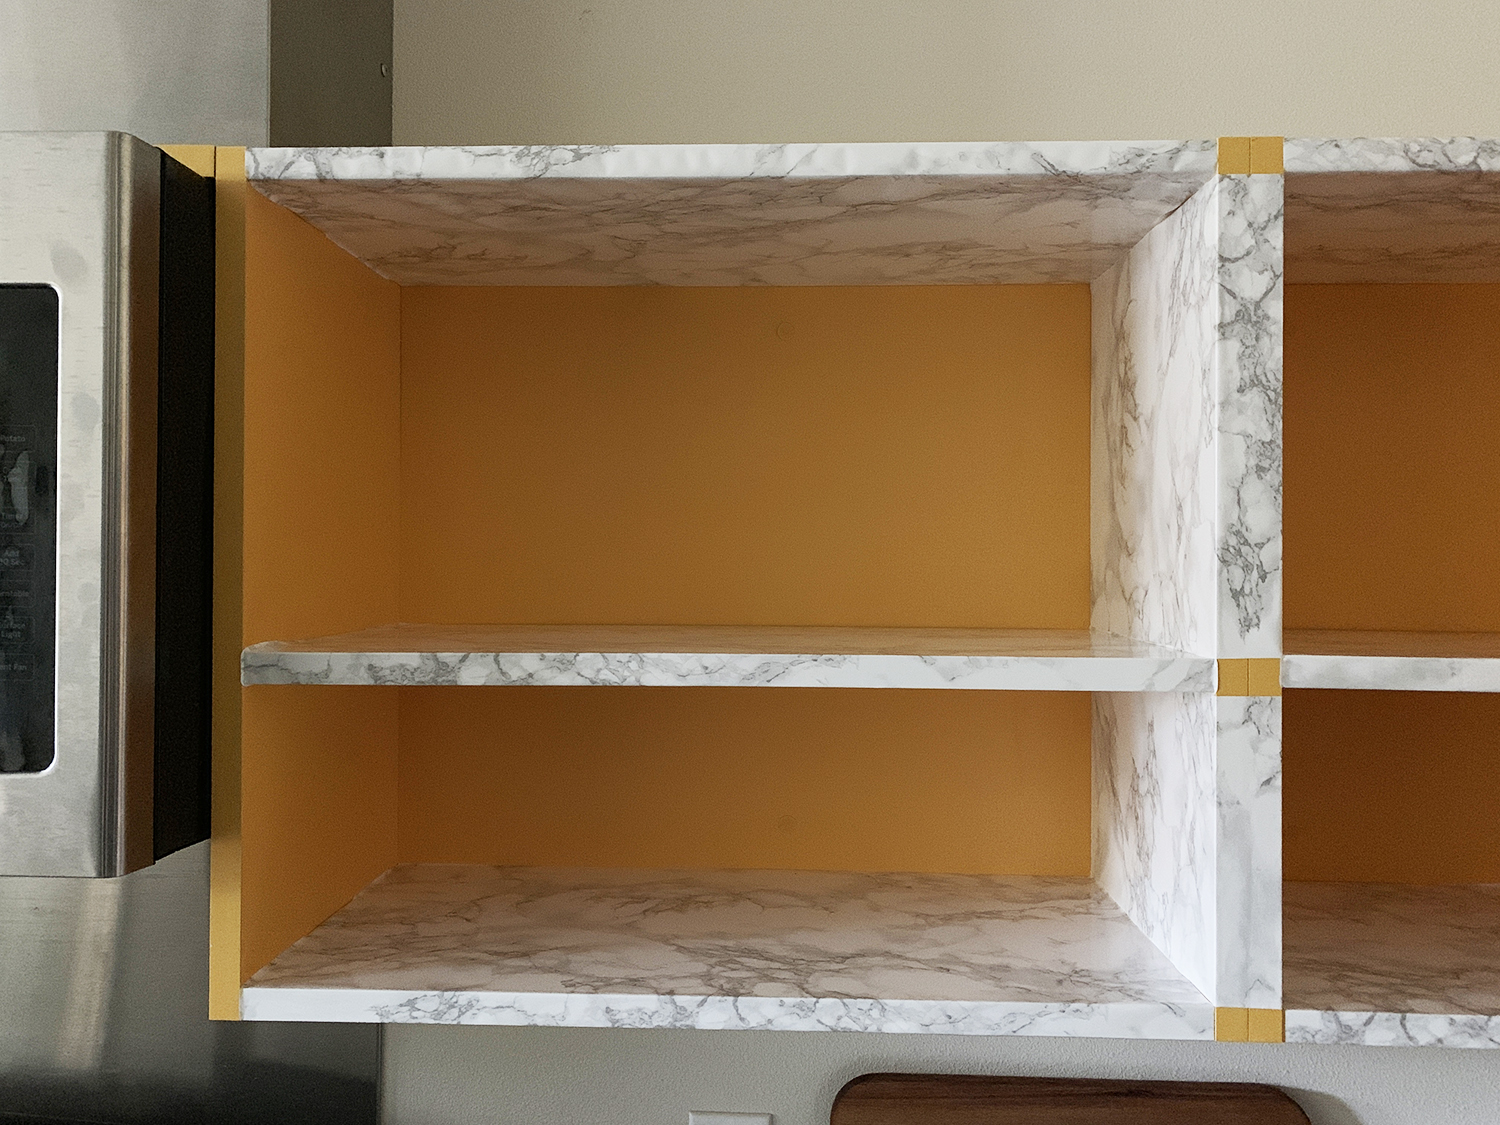 How to Update an Old Kitchen Shelf with Contact Paper